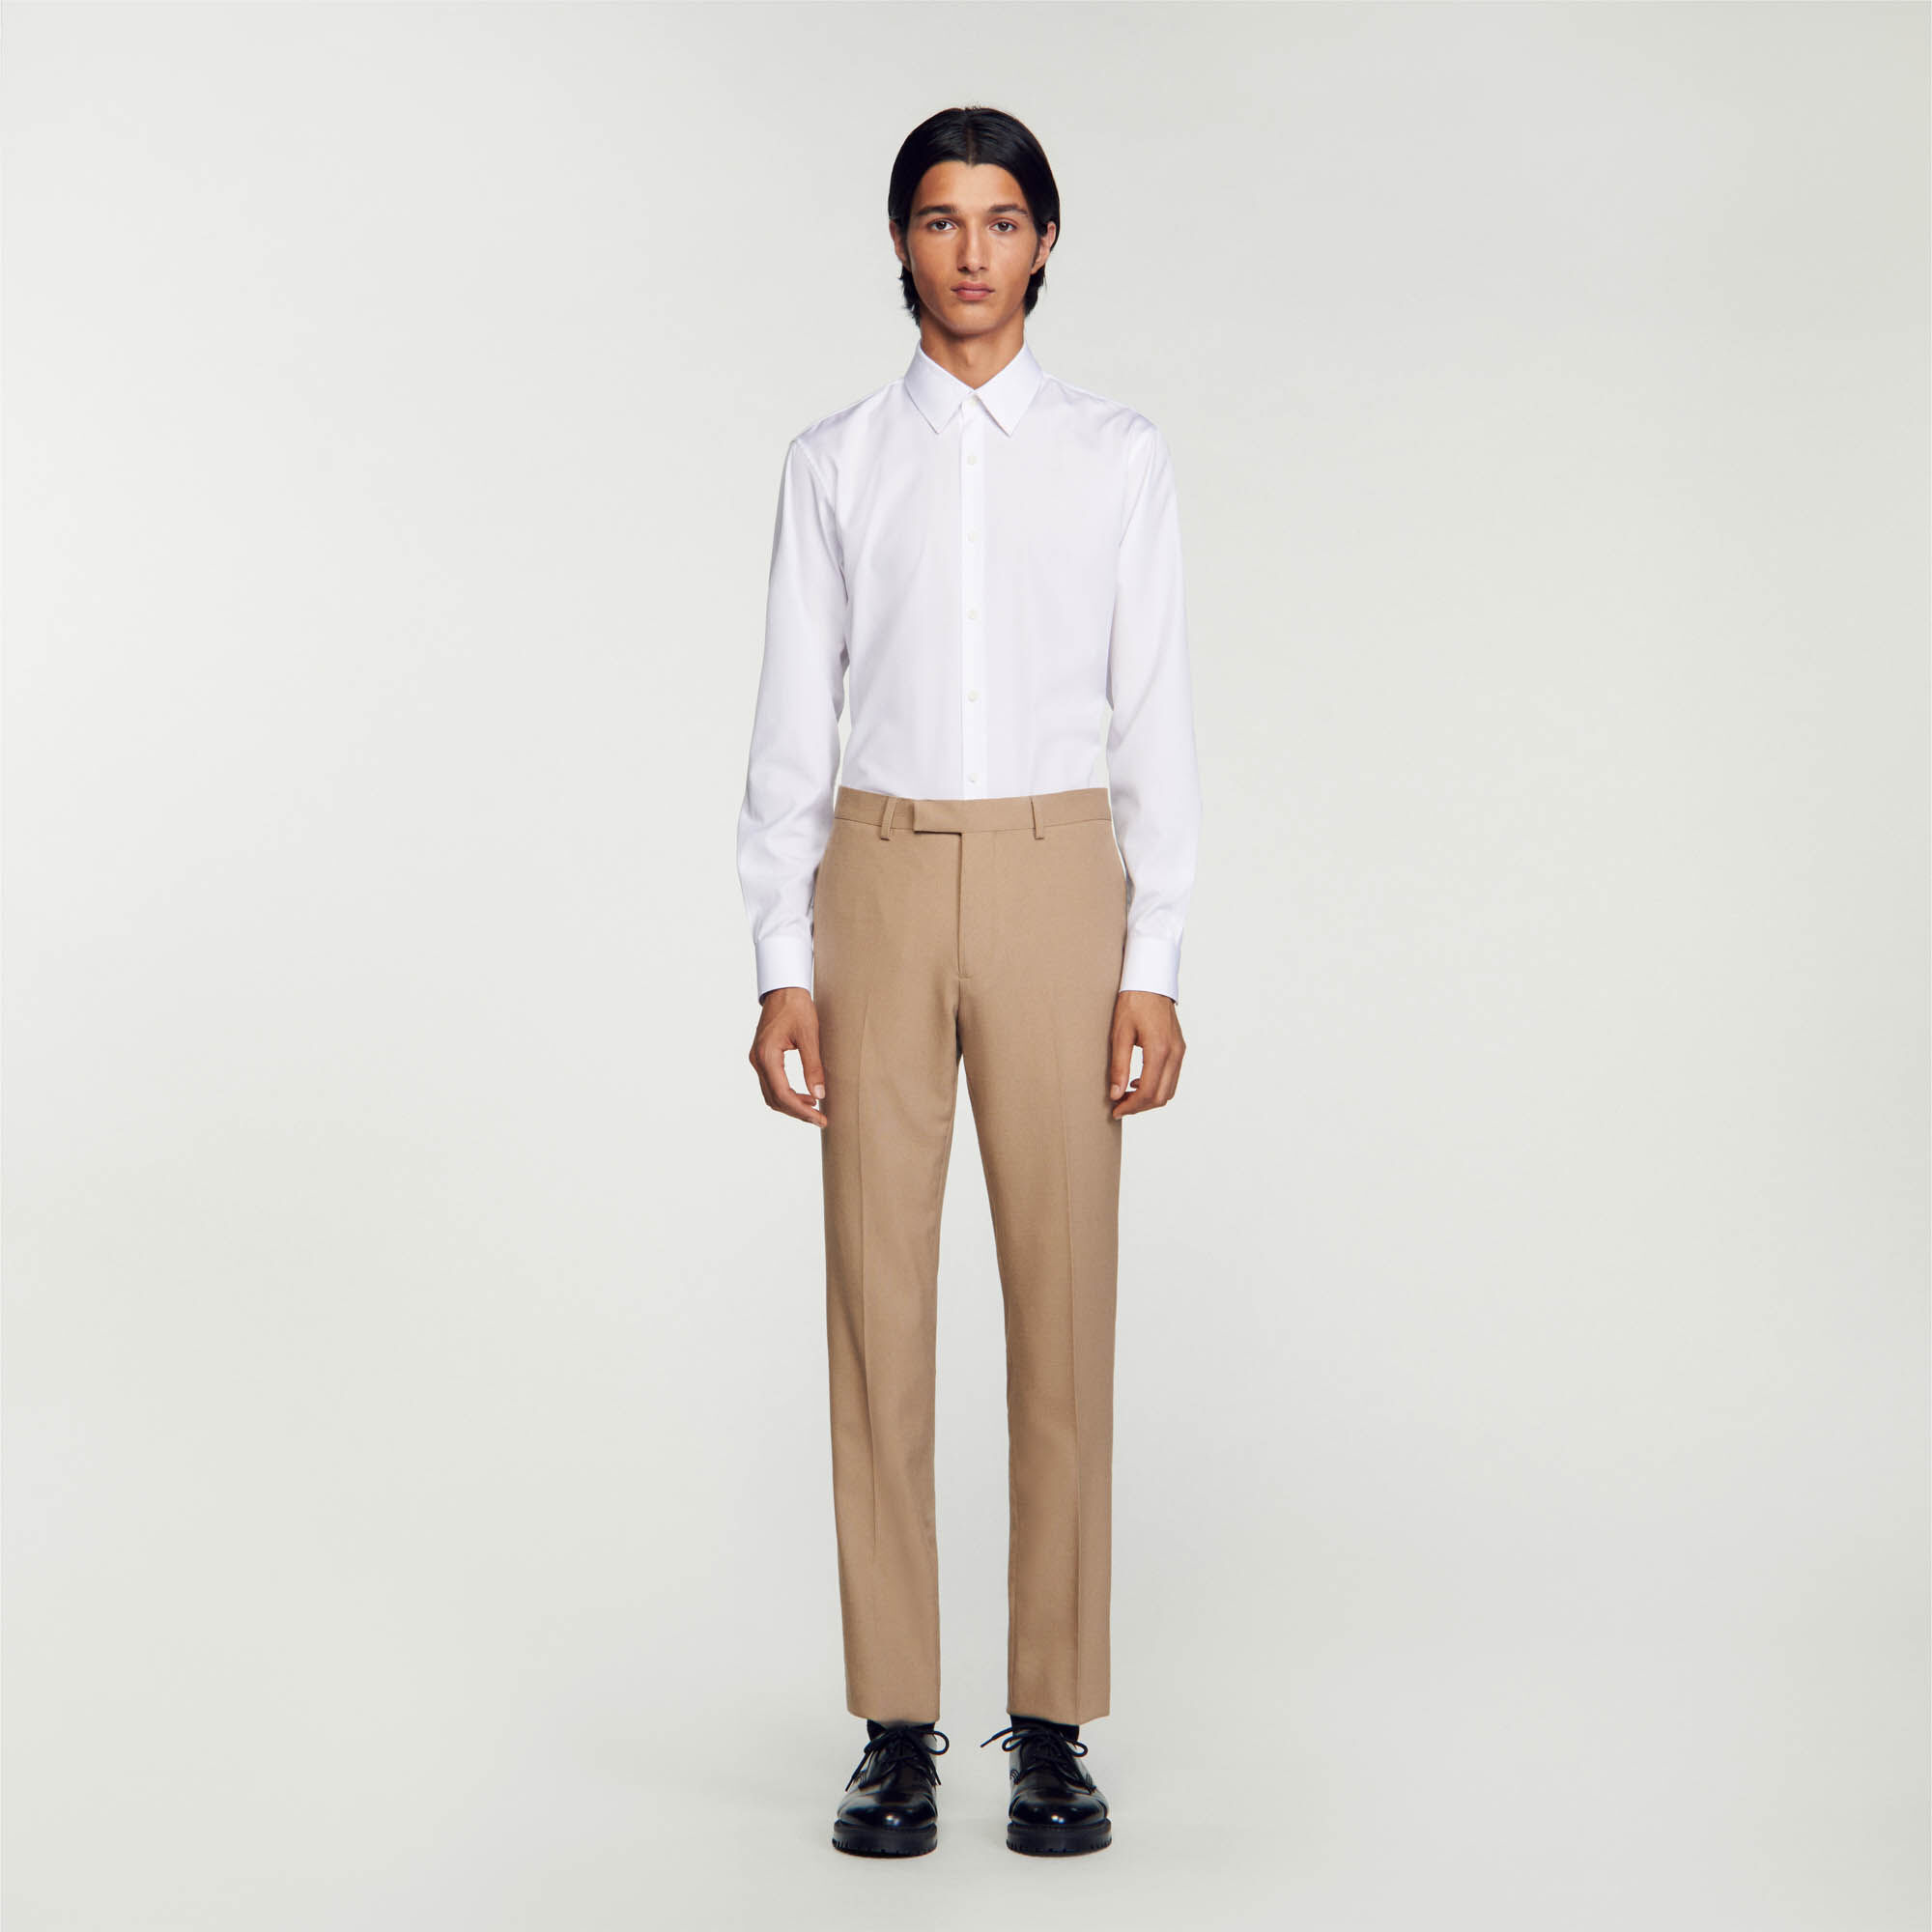 River Island Textured Suit Trousers in Natural for Men | Lyst